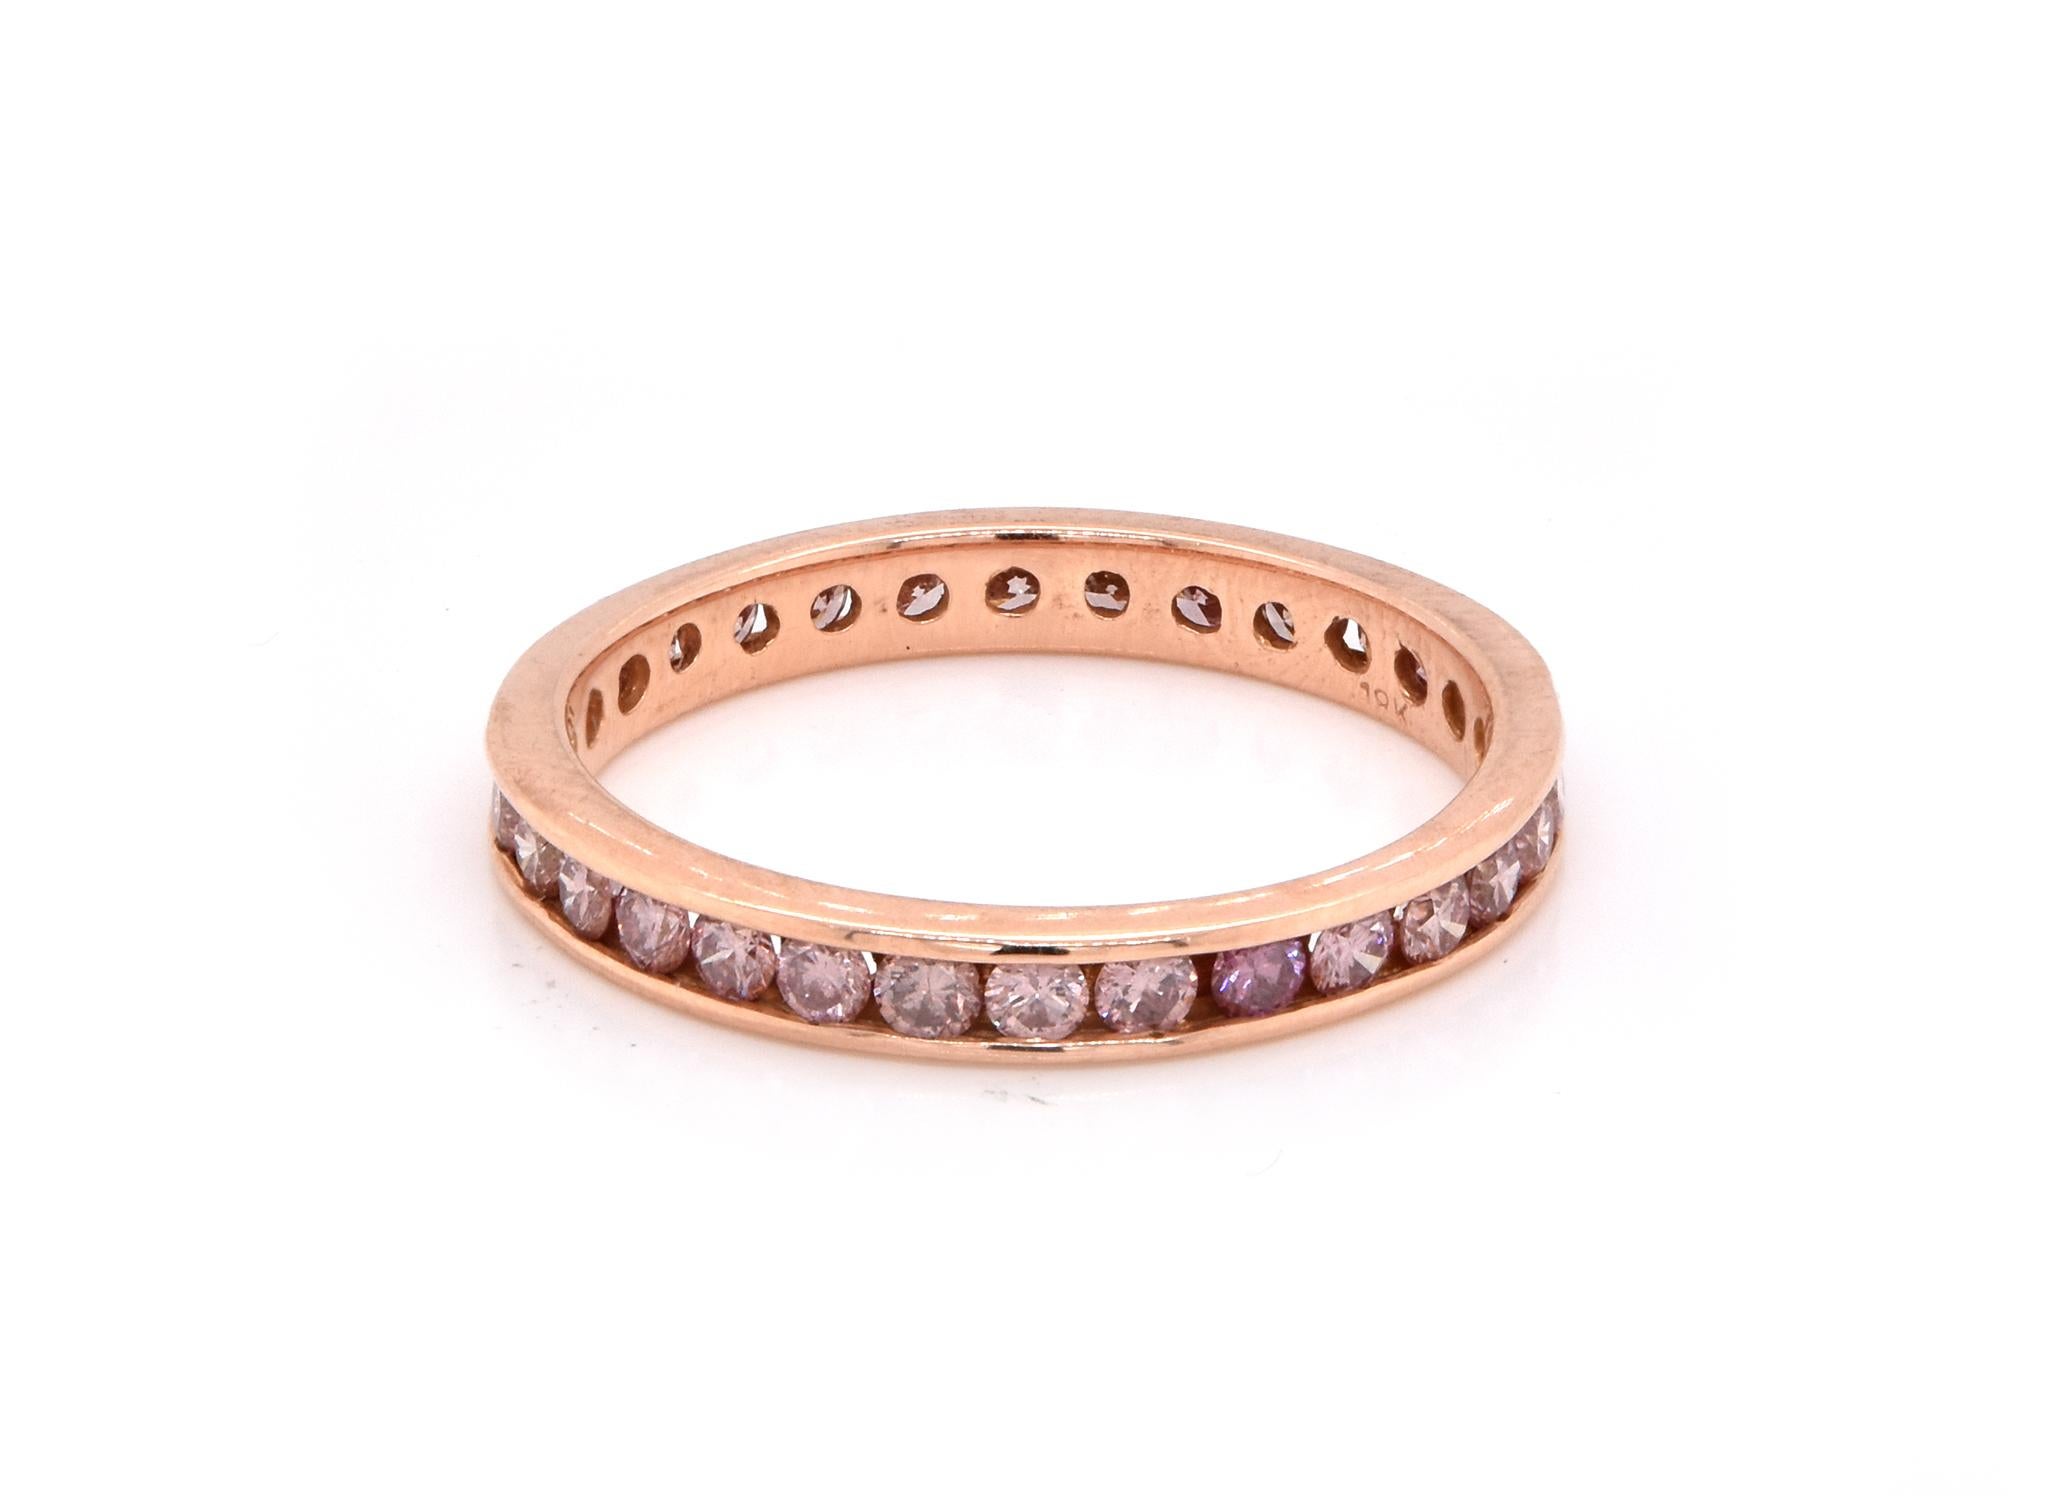 Designer: Custom
Material: 18K rose gold
Diamonds: 30 round cut = .90cttw 
Color: Pink
Clarity: SI1-2
Size: 6.75
Dimensions: ring measures 2.9mm in width
Weight: 1.98 grams
